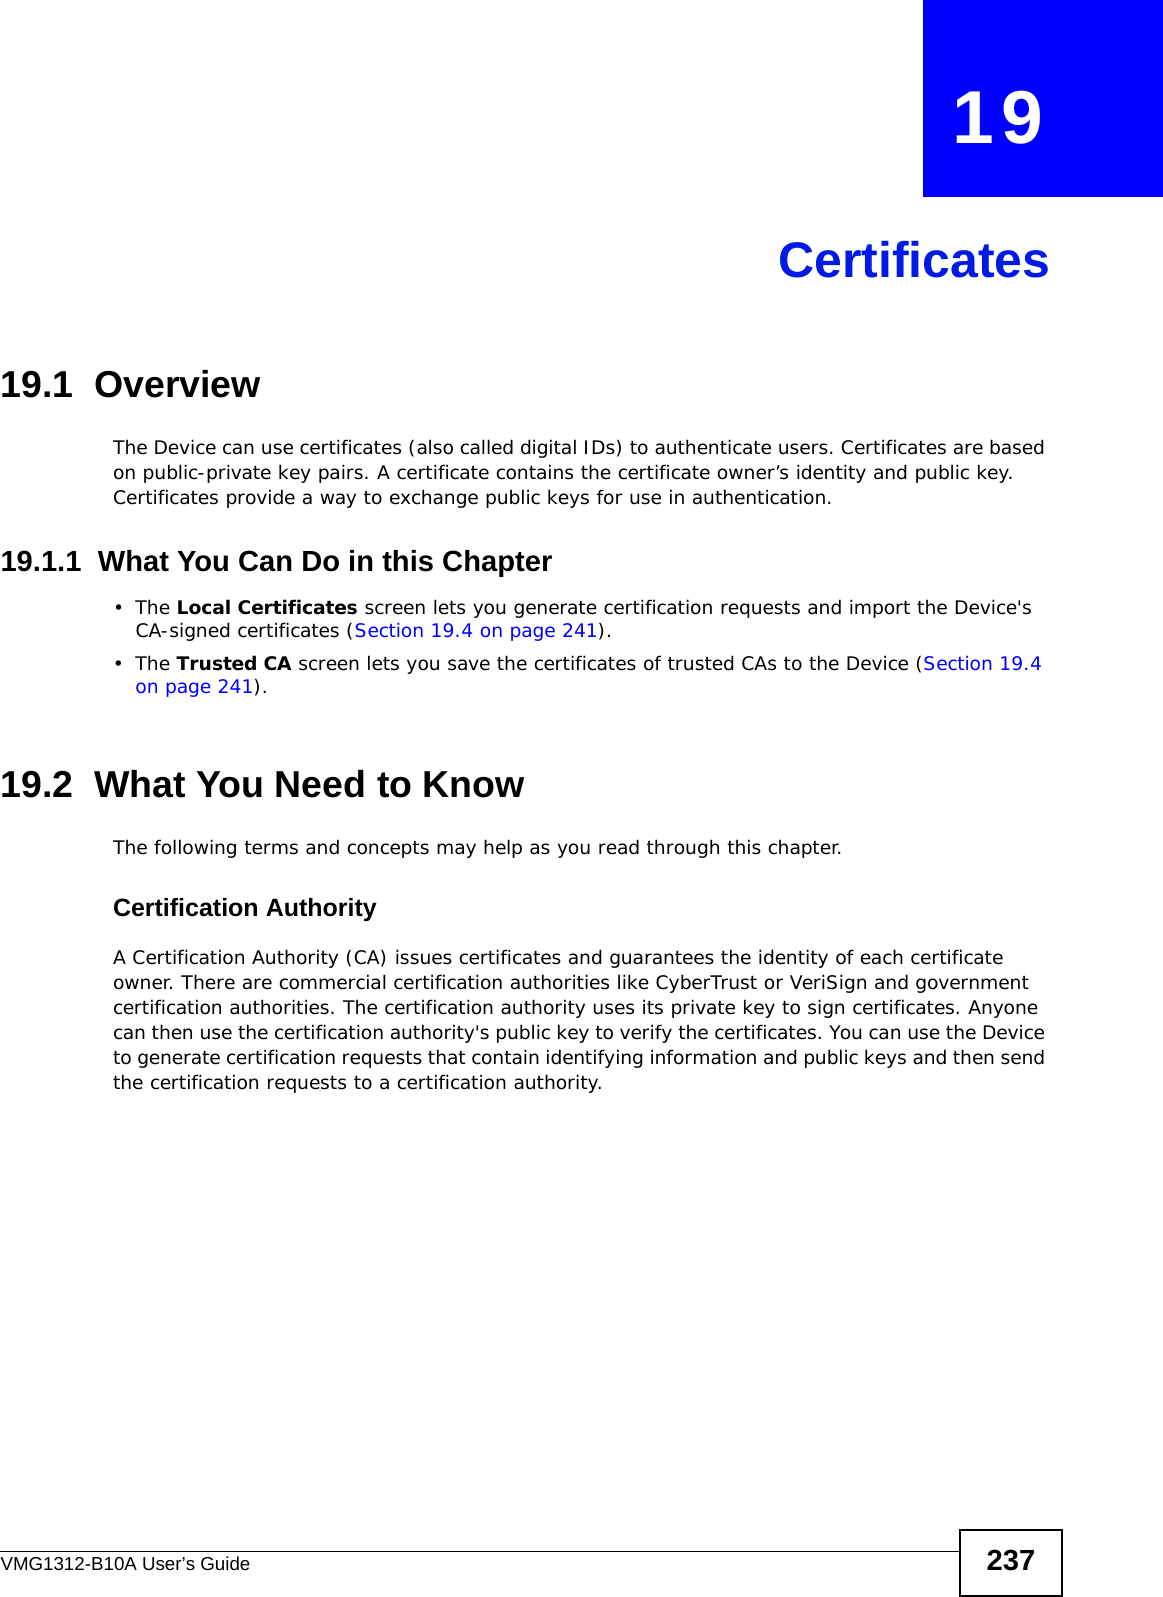 VMG1312-B10A User’s Guide 237CHAPTER   19Certificates19.1  OverviewThe Device can use certificates (also called digital IDs) to authenticate users. Certificates are based on public-private key pairs. A certificate contains the certificate owner’s identity and public key. Certificates provide a way to exchange public keys for use in authentication. 19.1.1  What You Can Do in this Chapter•The Local Certificates screen lets you generate certification requests and import the Device&apos;s CA-signed certificates (Section 19.4 on page 241).•The Trusted CA screen lets you save the certificates of trusted CAs to the Device (Section 19.4 on page 241).19.2  What You Need to KnowThe following terms and concepts may help as you read through this chapter.Certification Authority A Certification Authority (CA) issues certificates and guarantees the identity of each certificate owner. There are commercial certification authorities like CyberTrust or VeriSign and government certification authorities. The certification authority uses its private key to sign certificates. Anyone can then use the certification authority&apos;s public key to verify the certificates. You can use the Device to generate certification requests that contain identifying information and public keys and then send the certification requests to a certification authority.